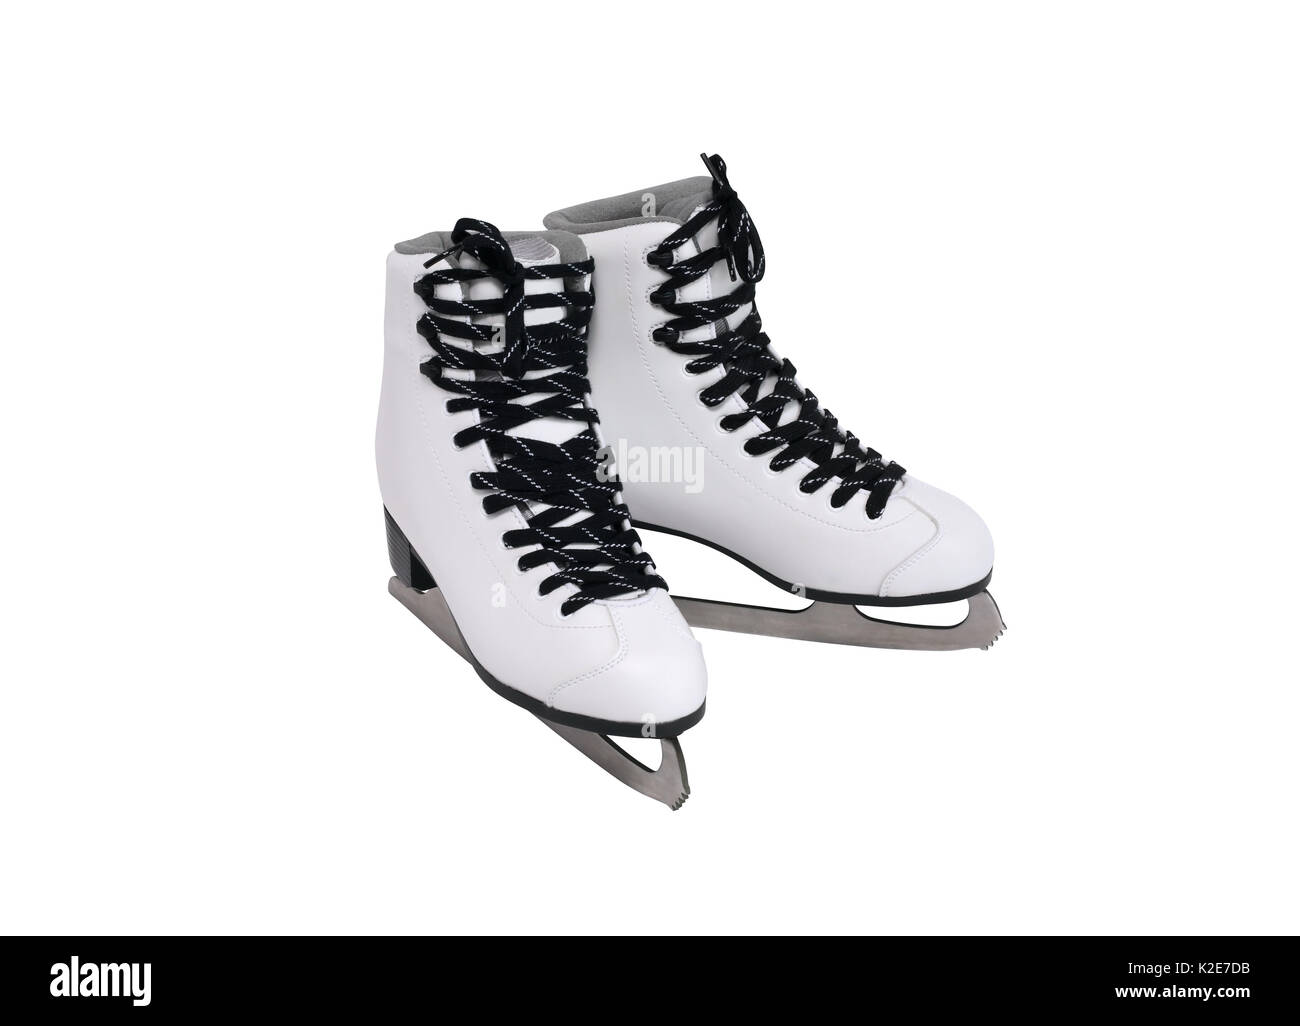 New white female ice skating shoes. Isolated on white with clipping path Stock Photo